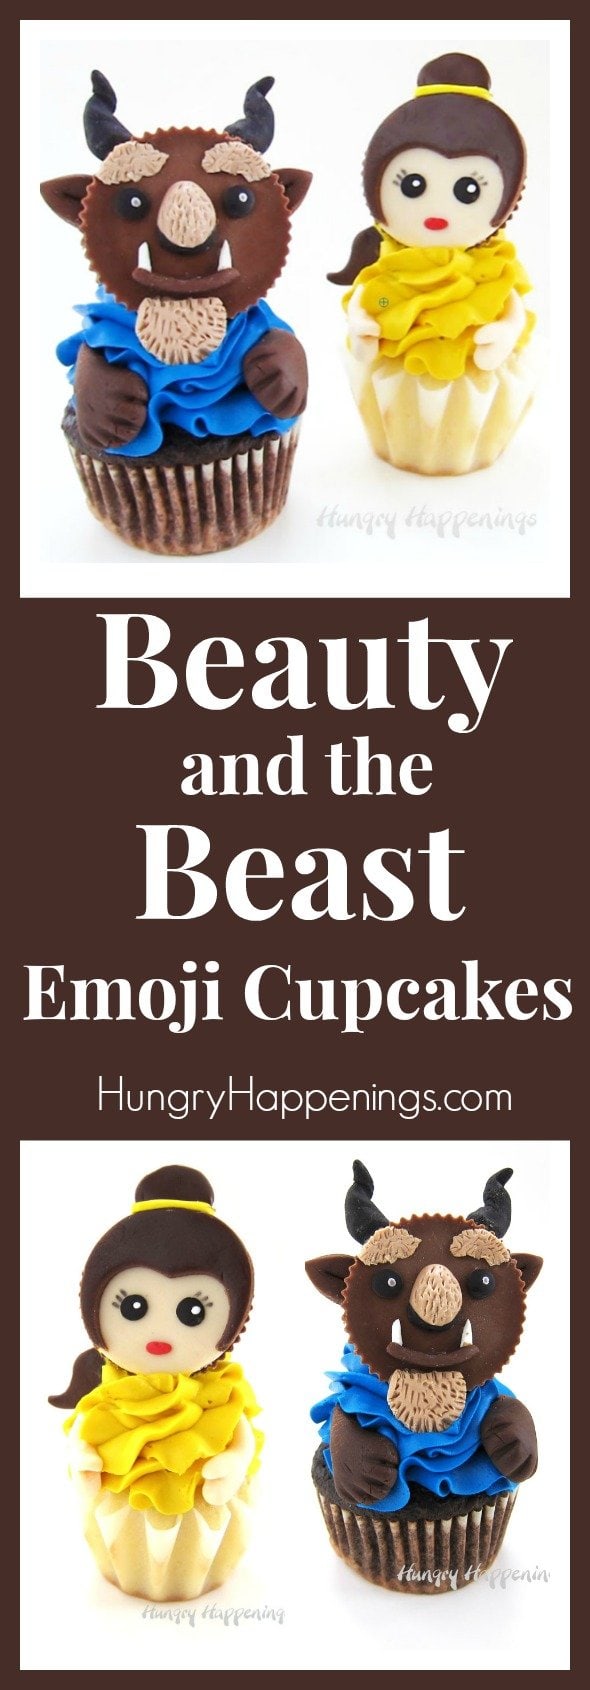 Decorate Reese's Cups using candy clay (modeling chocolate) to create stunning Beauty and the Beast Emoji Cupcakes. Kids and adults will fall in love with these sweet fairytale treats.